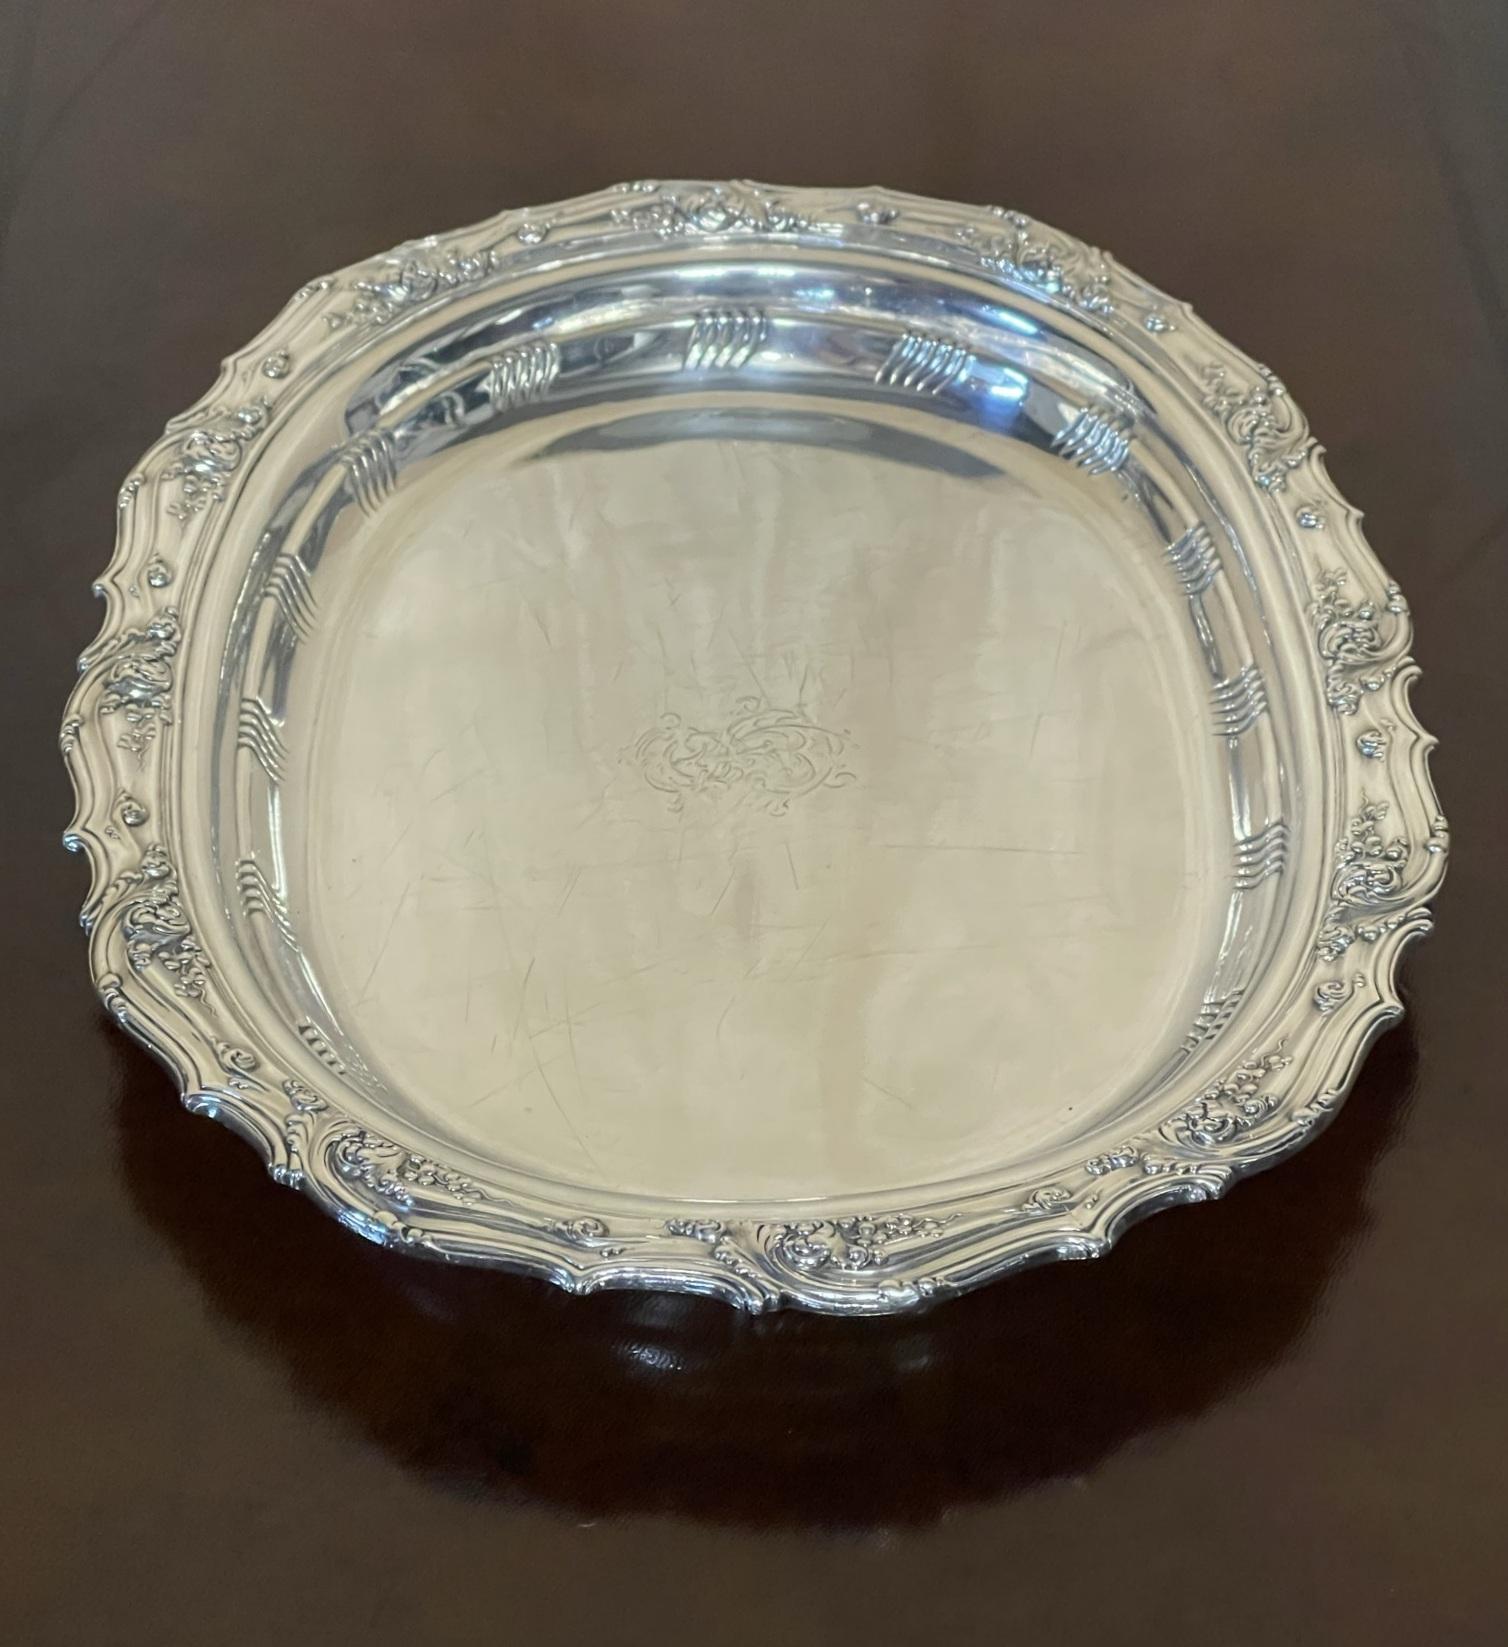 Super COLLECTable WORLD FAiR CHICAGO 1893 ANTIQUE TIFFANY & CO STERLING TRAY im Angebot 7